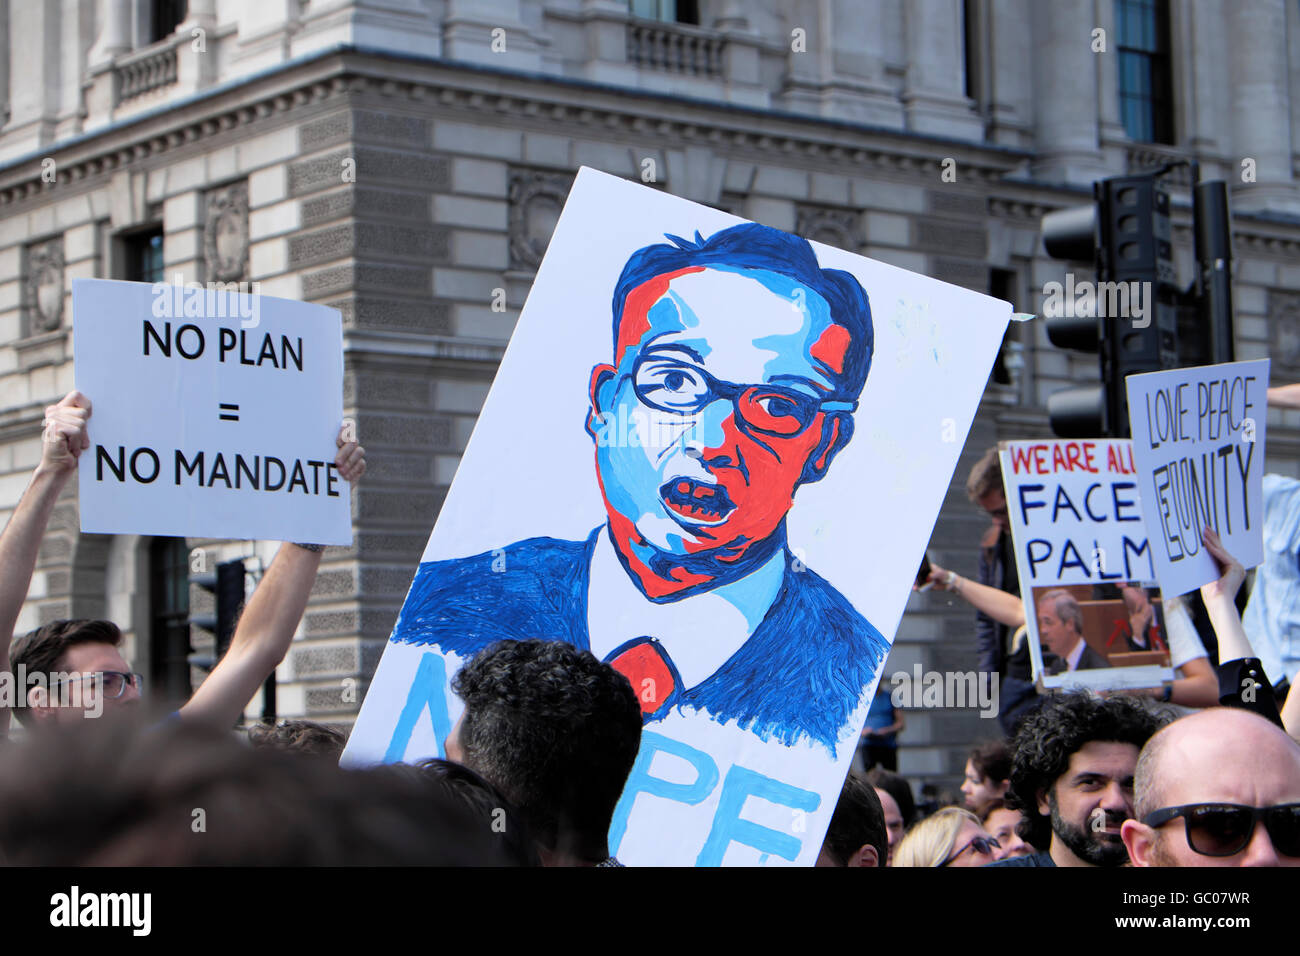 Protestors with Conservative Tory politician Michael Gove portrait poster at Brexit Protest in London England  KATHY DEWITT 23 June 2016 KATHY DEWITT Stock Photo